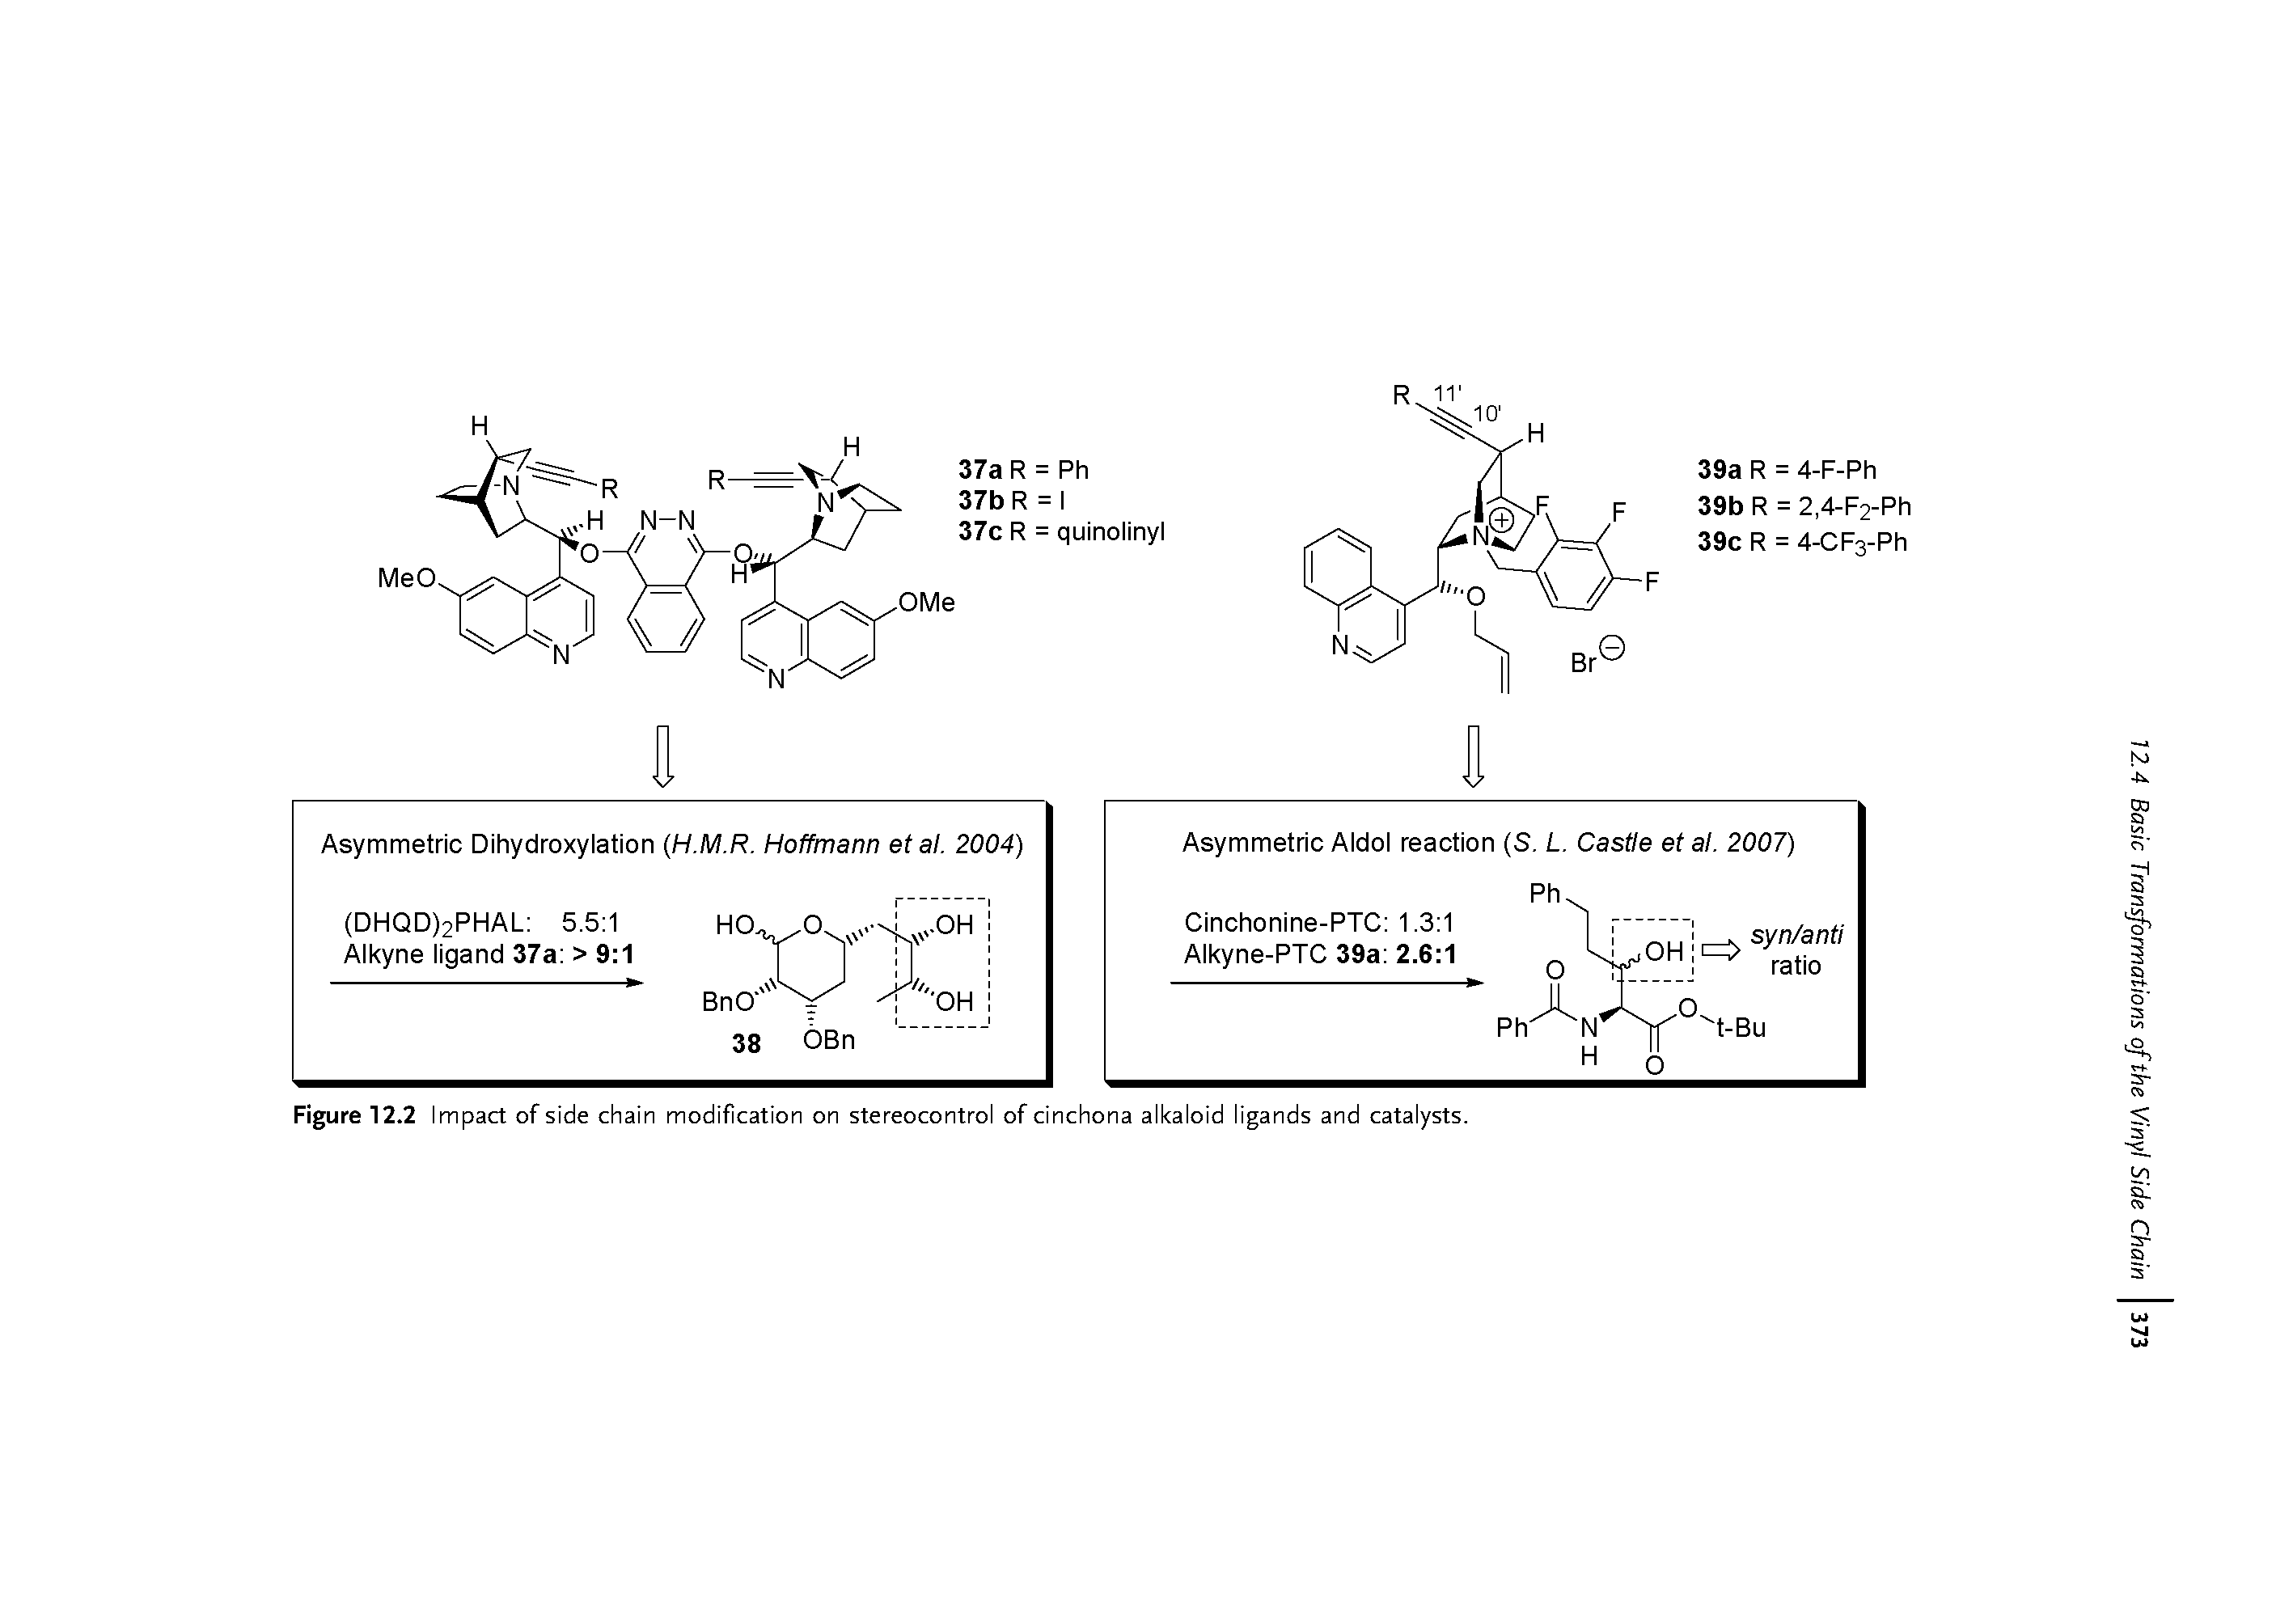 Figure 12.2 Impact of side chain modification on stereocontrol of cinchona alkaloid ligands and catalysts.